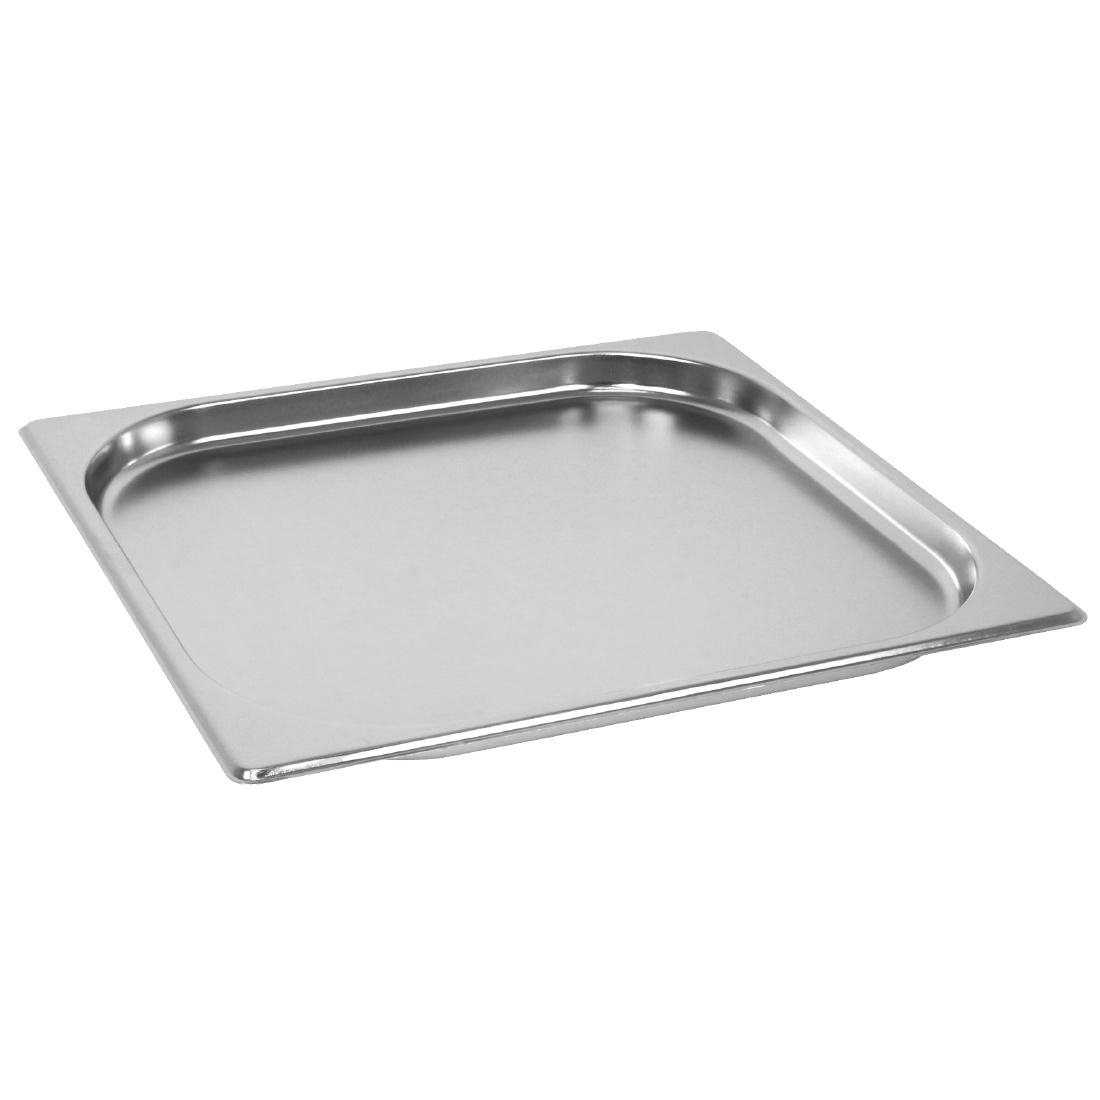 Vogue Stainless Steel GN 2/3 Pan 20mm